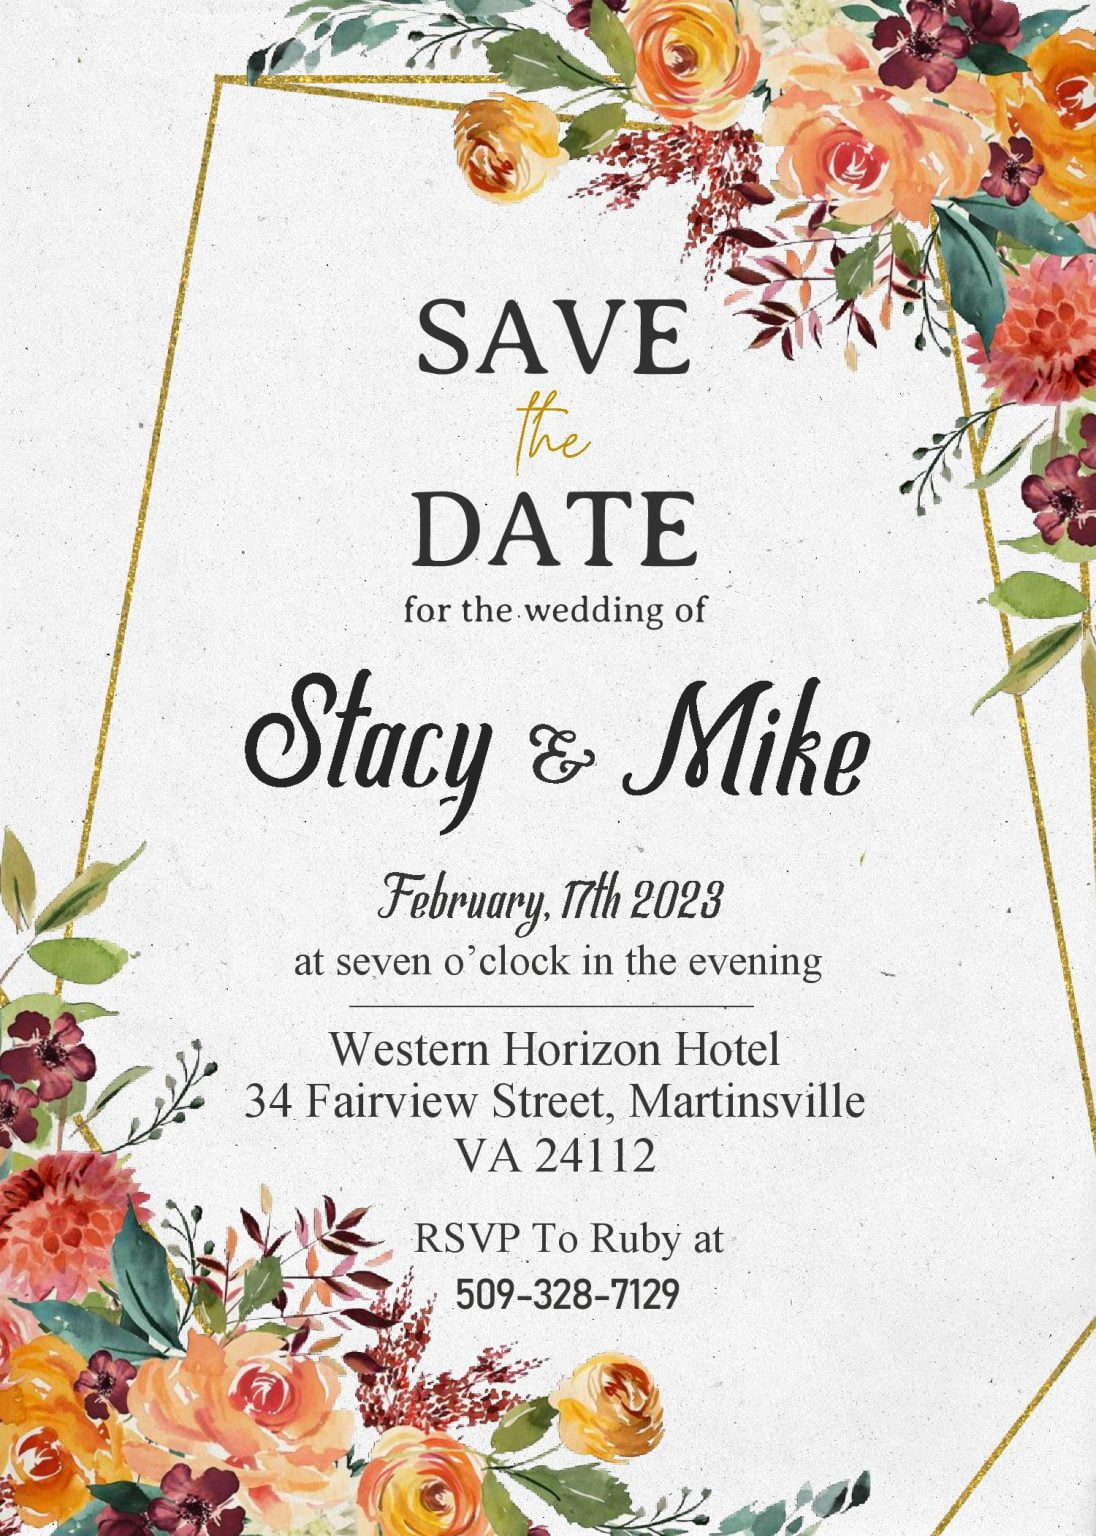 Save The Date Invitation Templates – Editable With MS Word | FREE